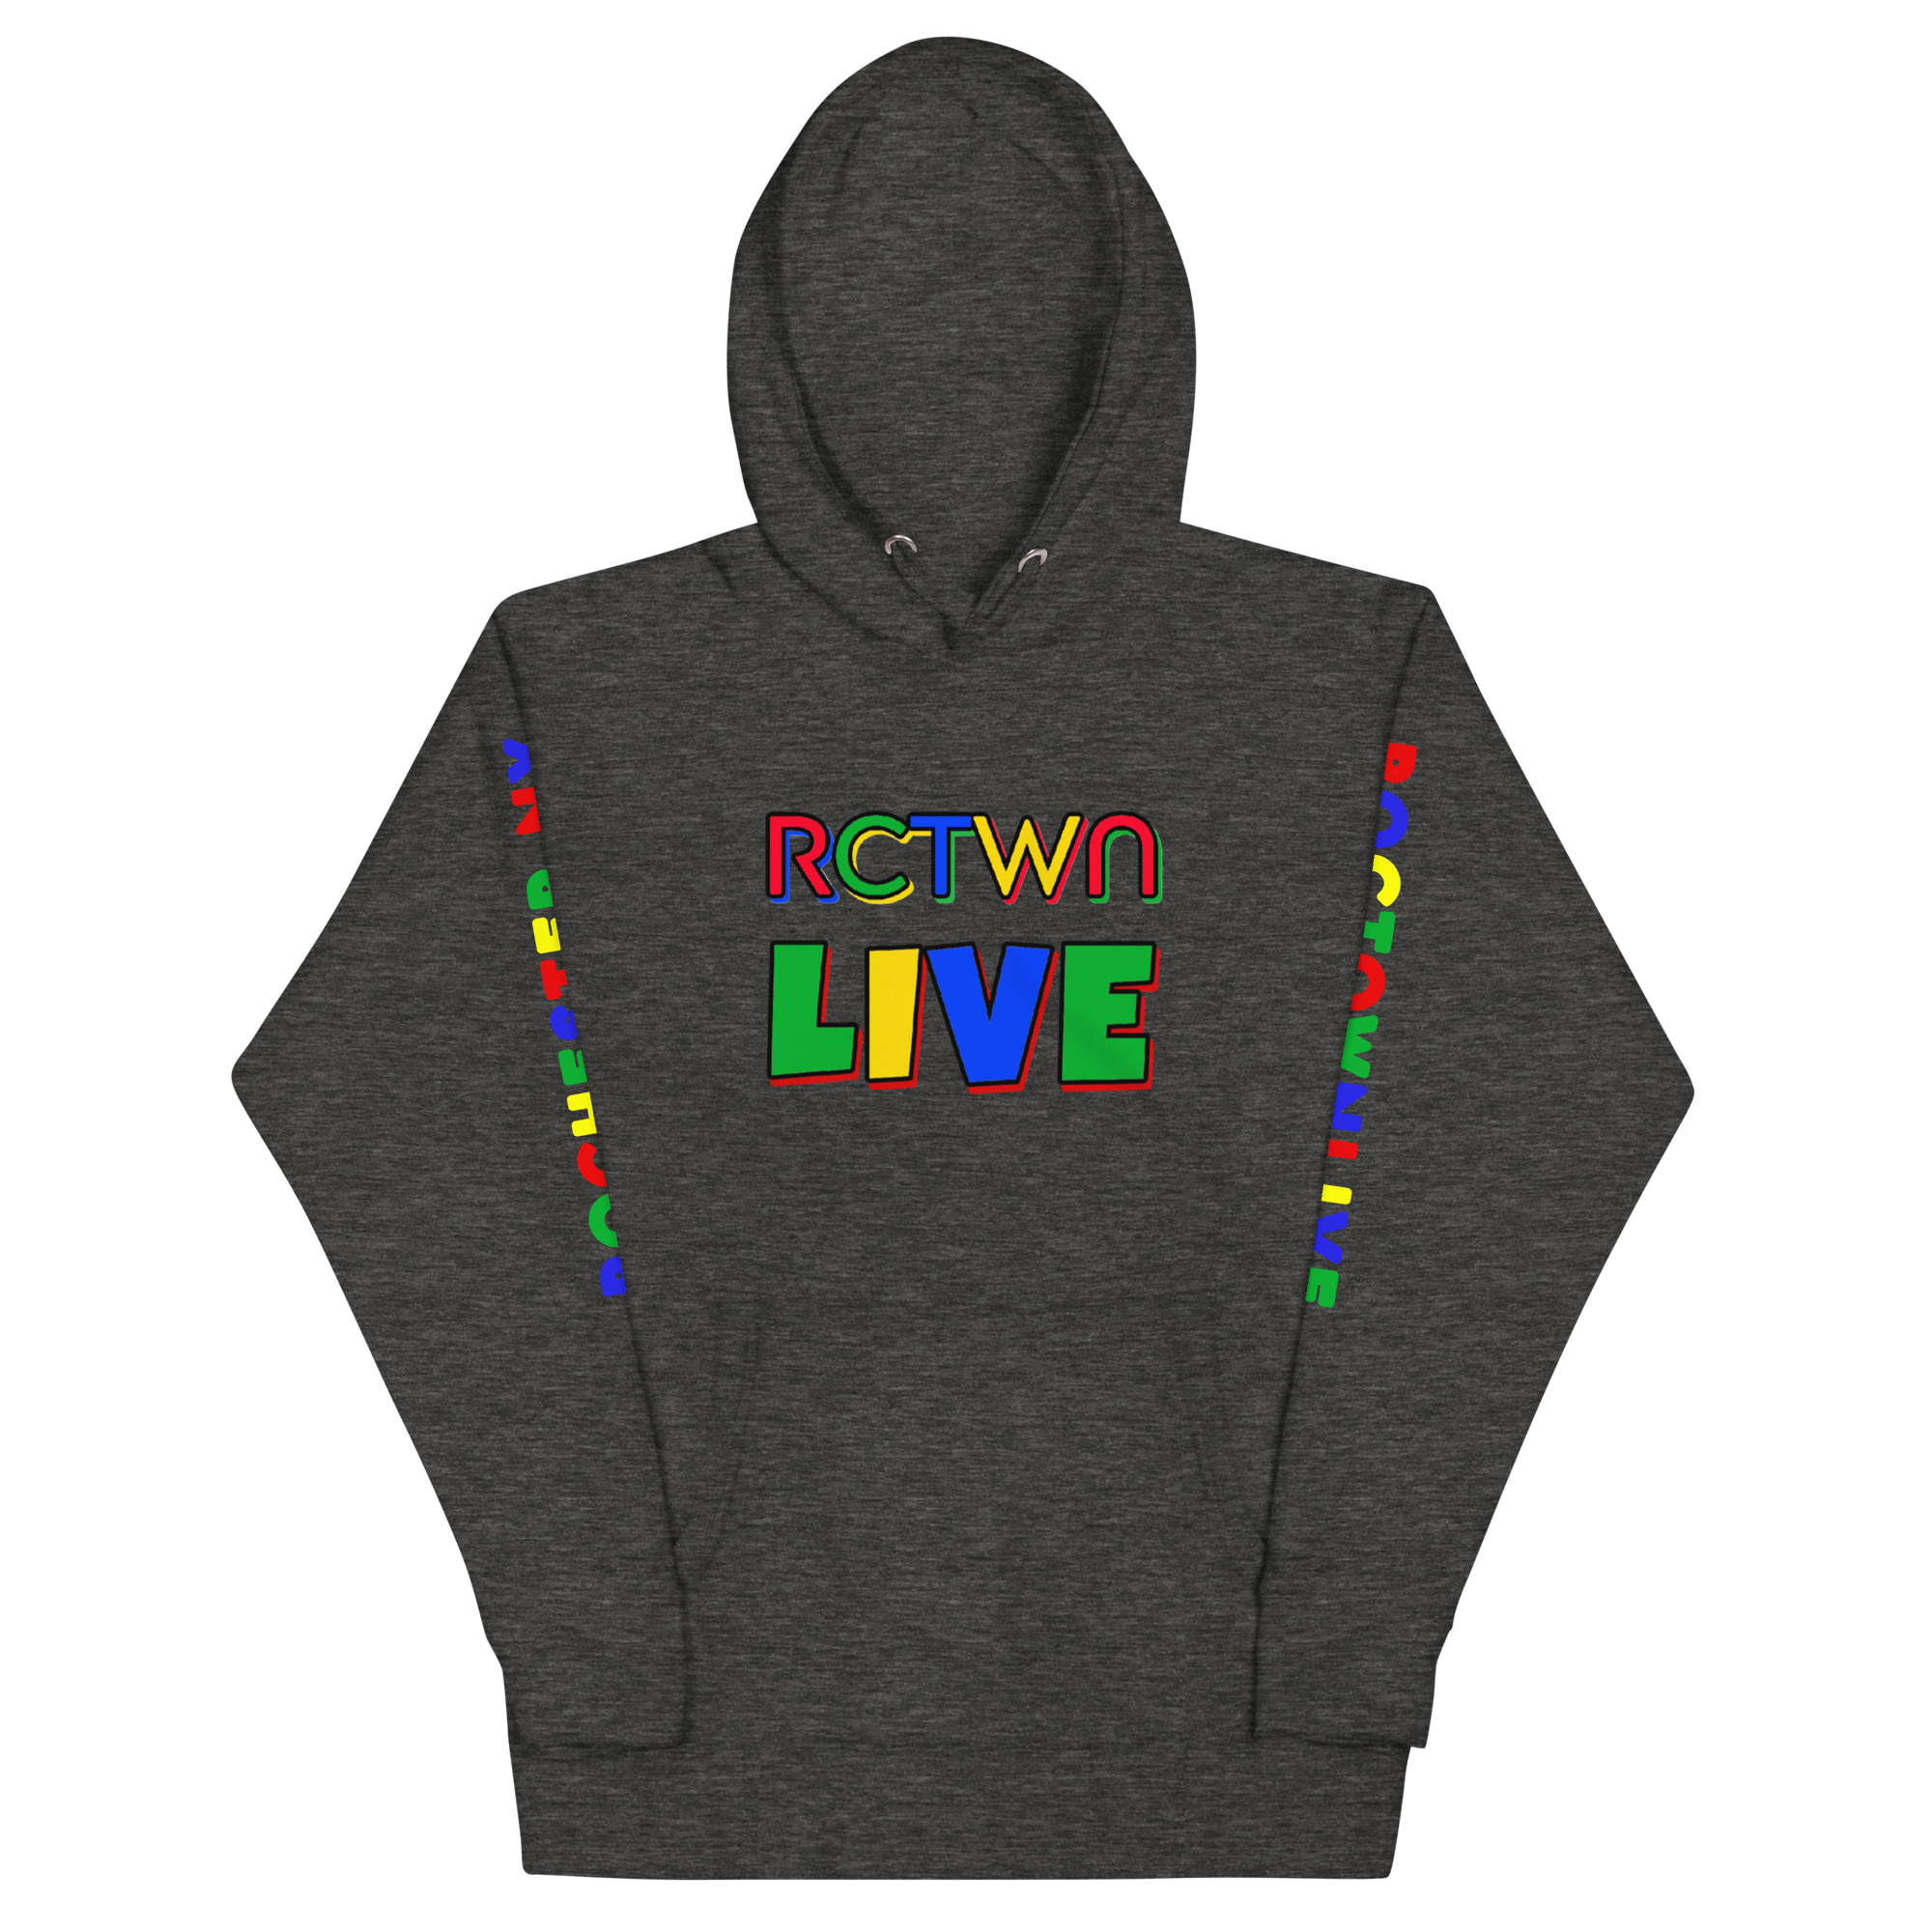 unisex-premium-hoodie-charcoal-heather-front-657151f260821.png